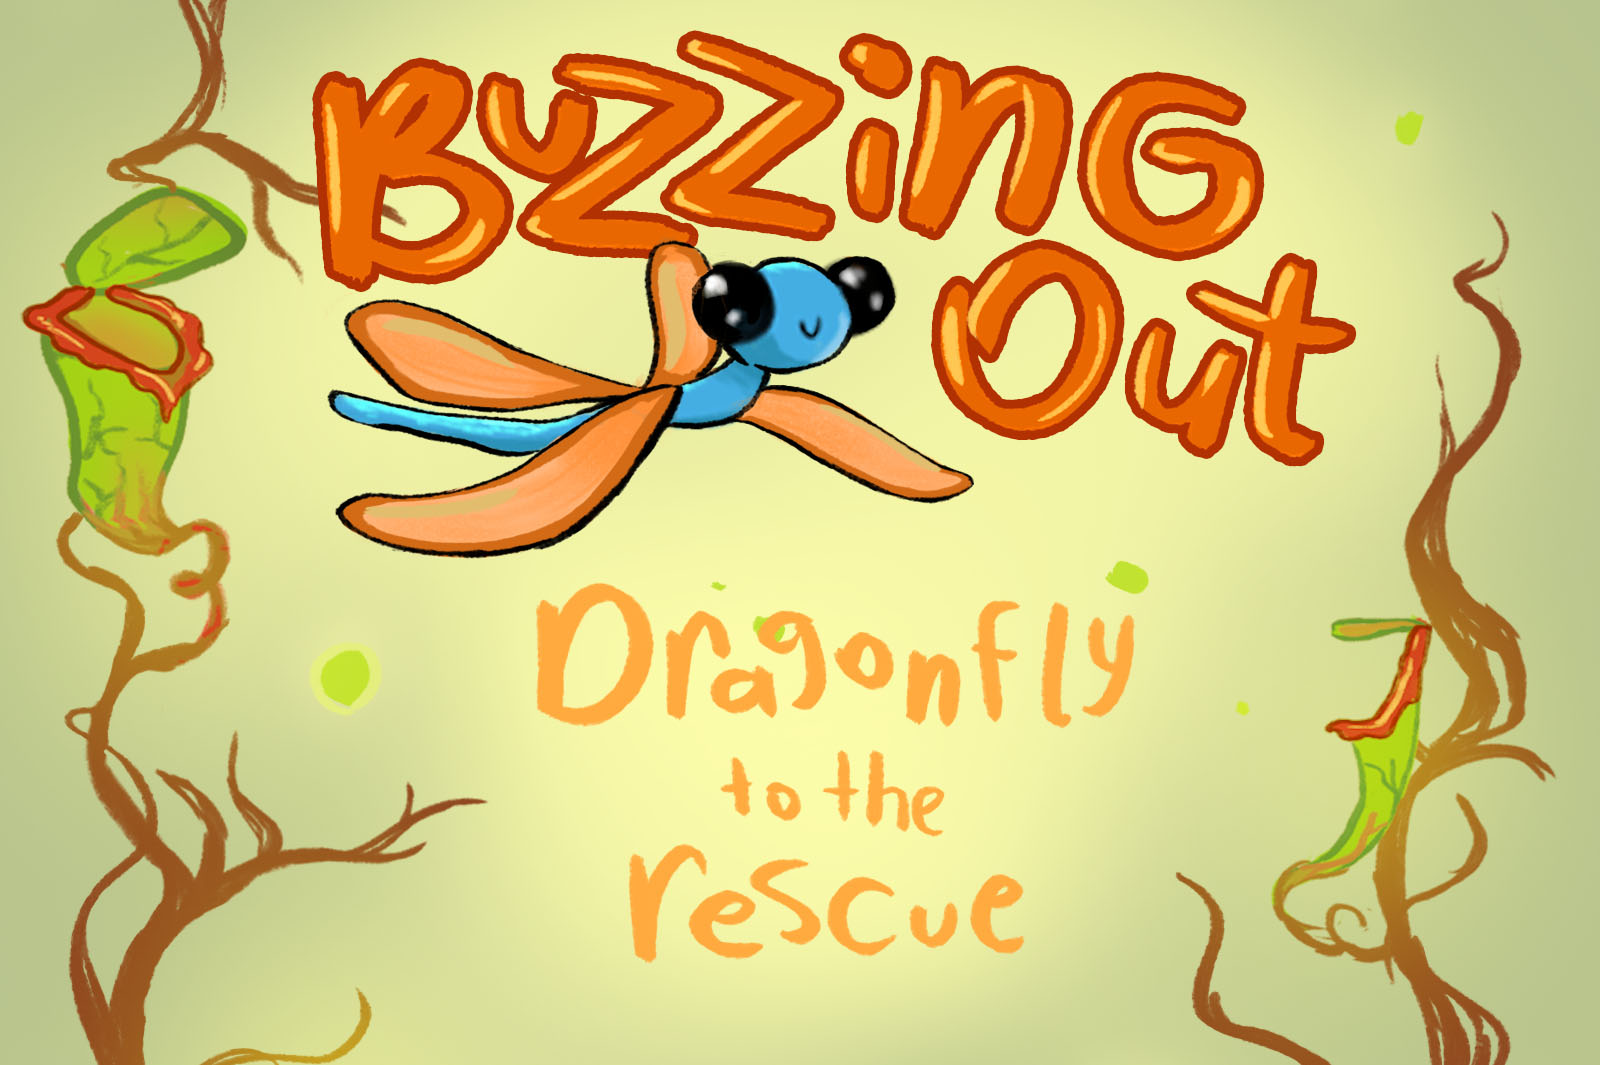 Buzzing Out: Dragonfly to the rescue